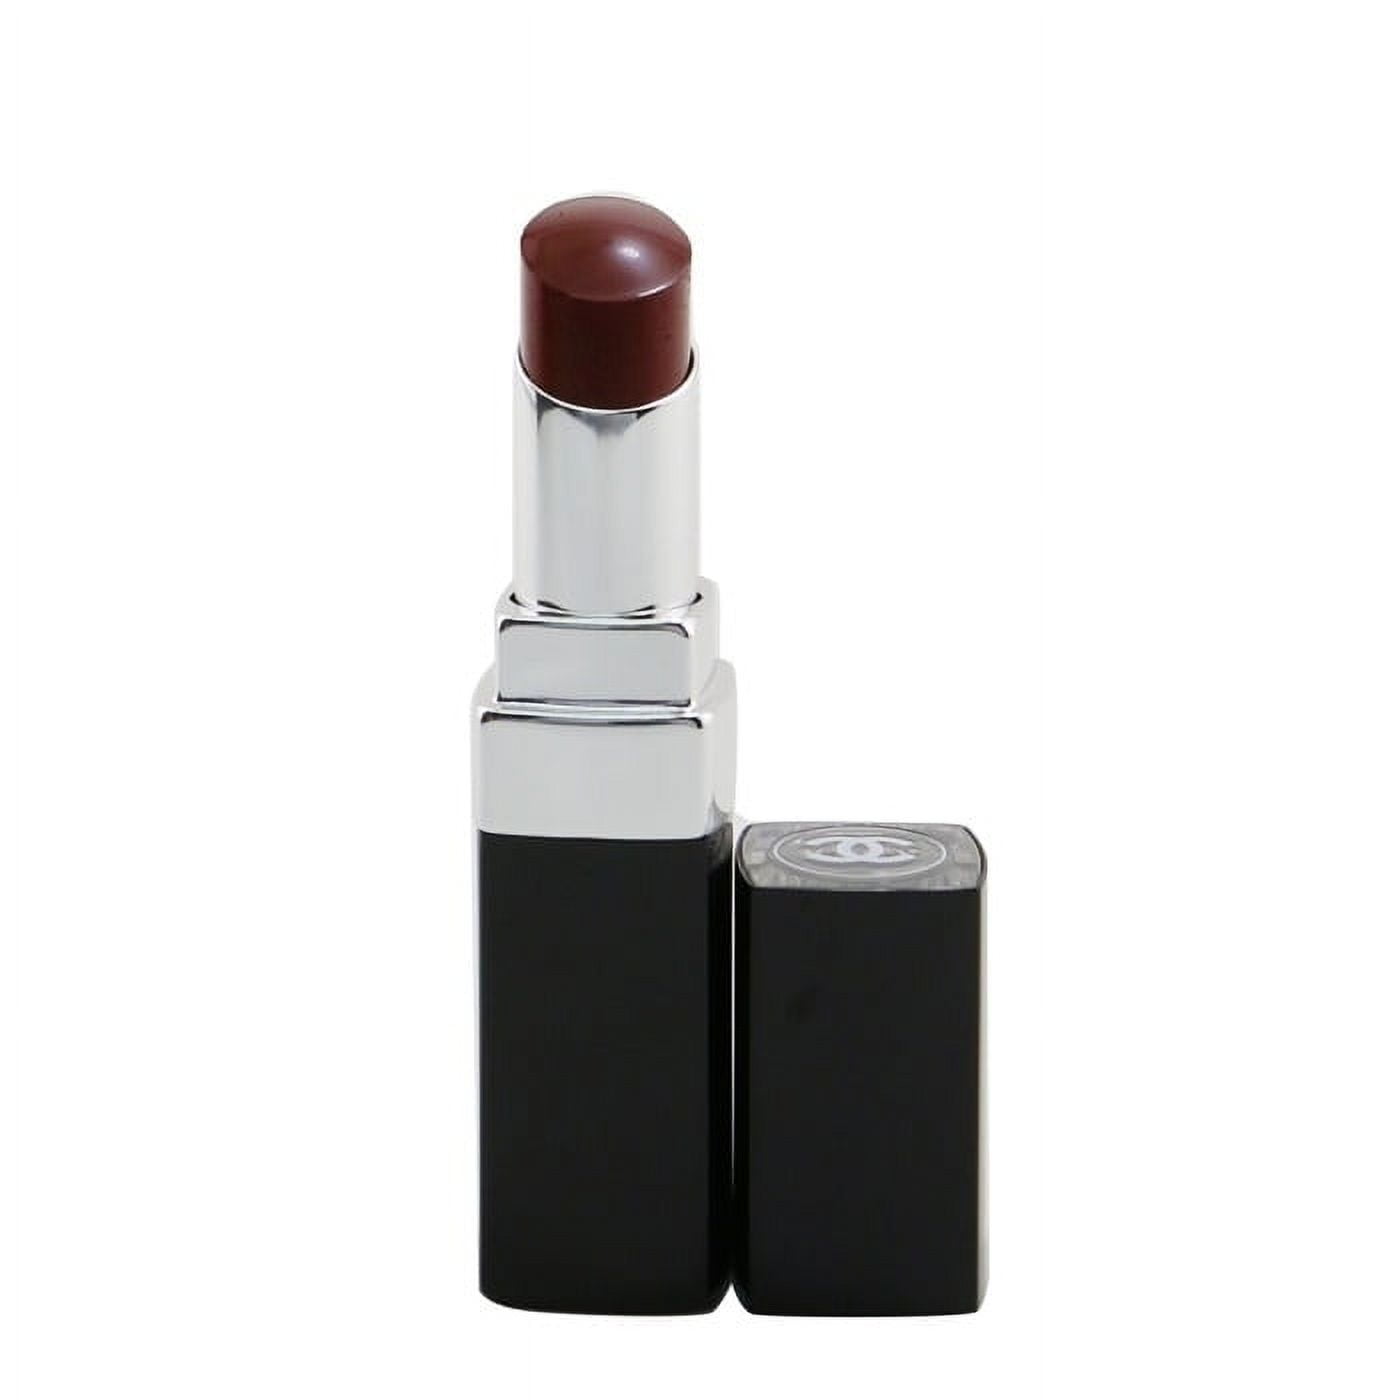 Chanel Rouge Coco Bloom Hydrating Plumping Intense Shine Lip Colour - # 114  Glow 3g/0.1oz 